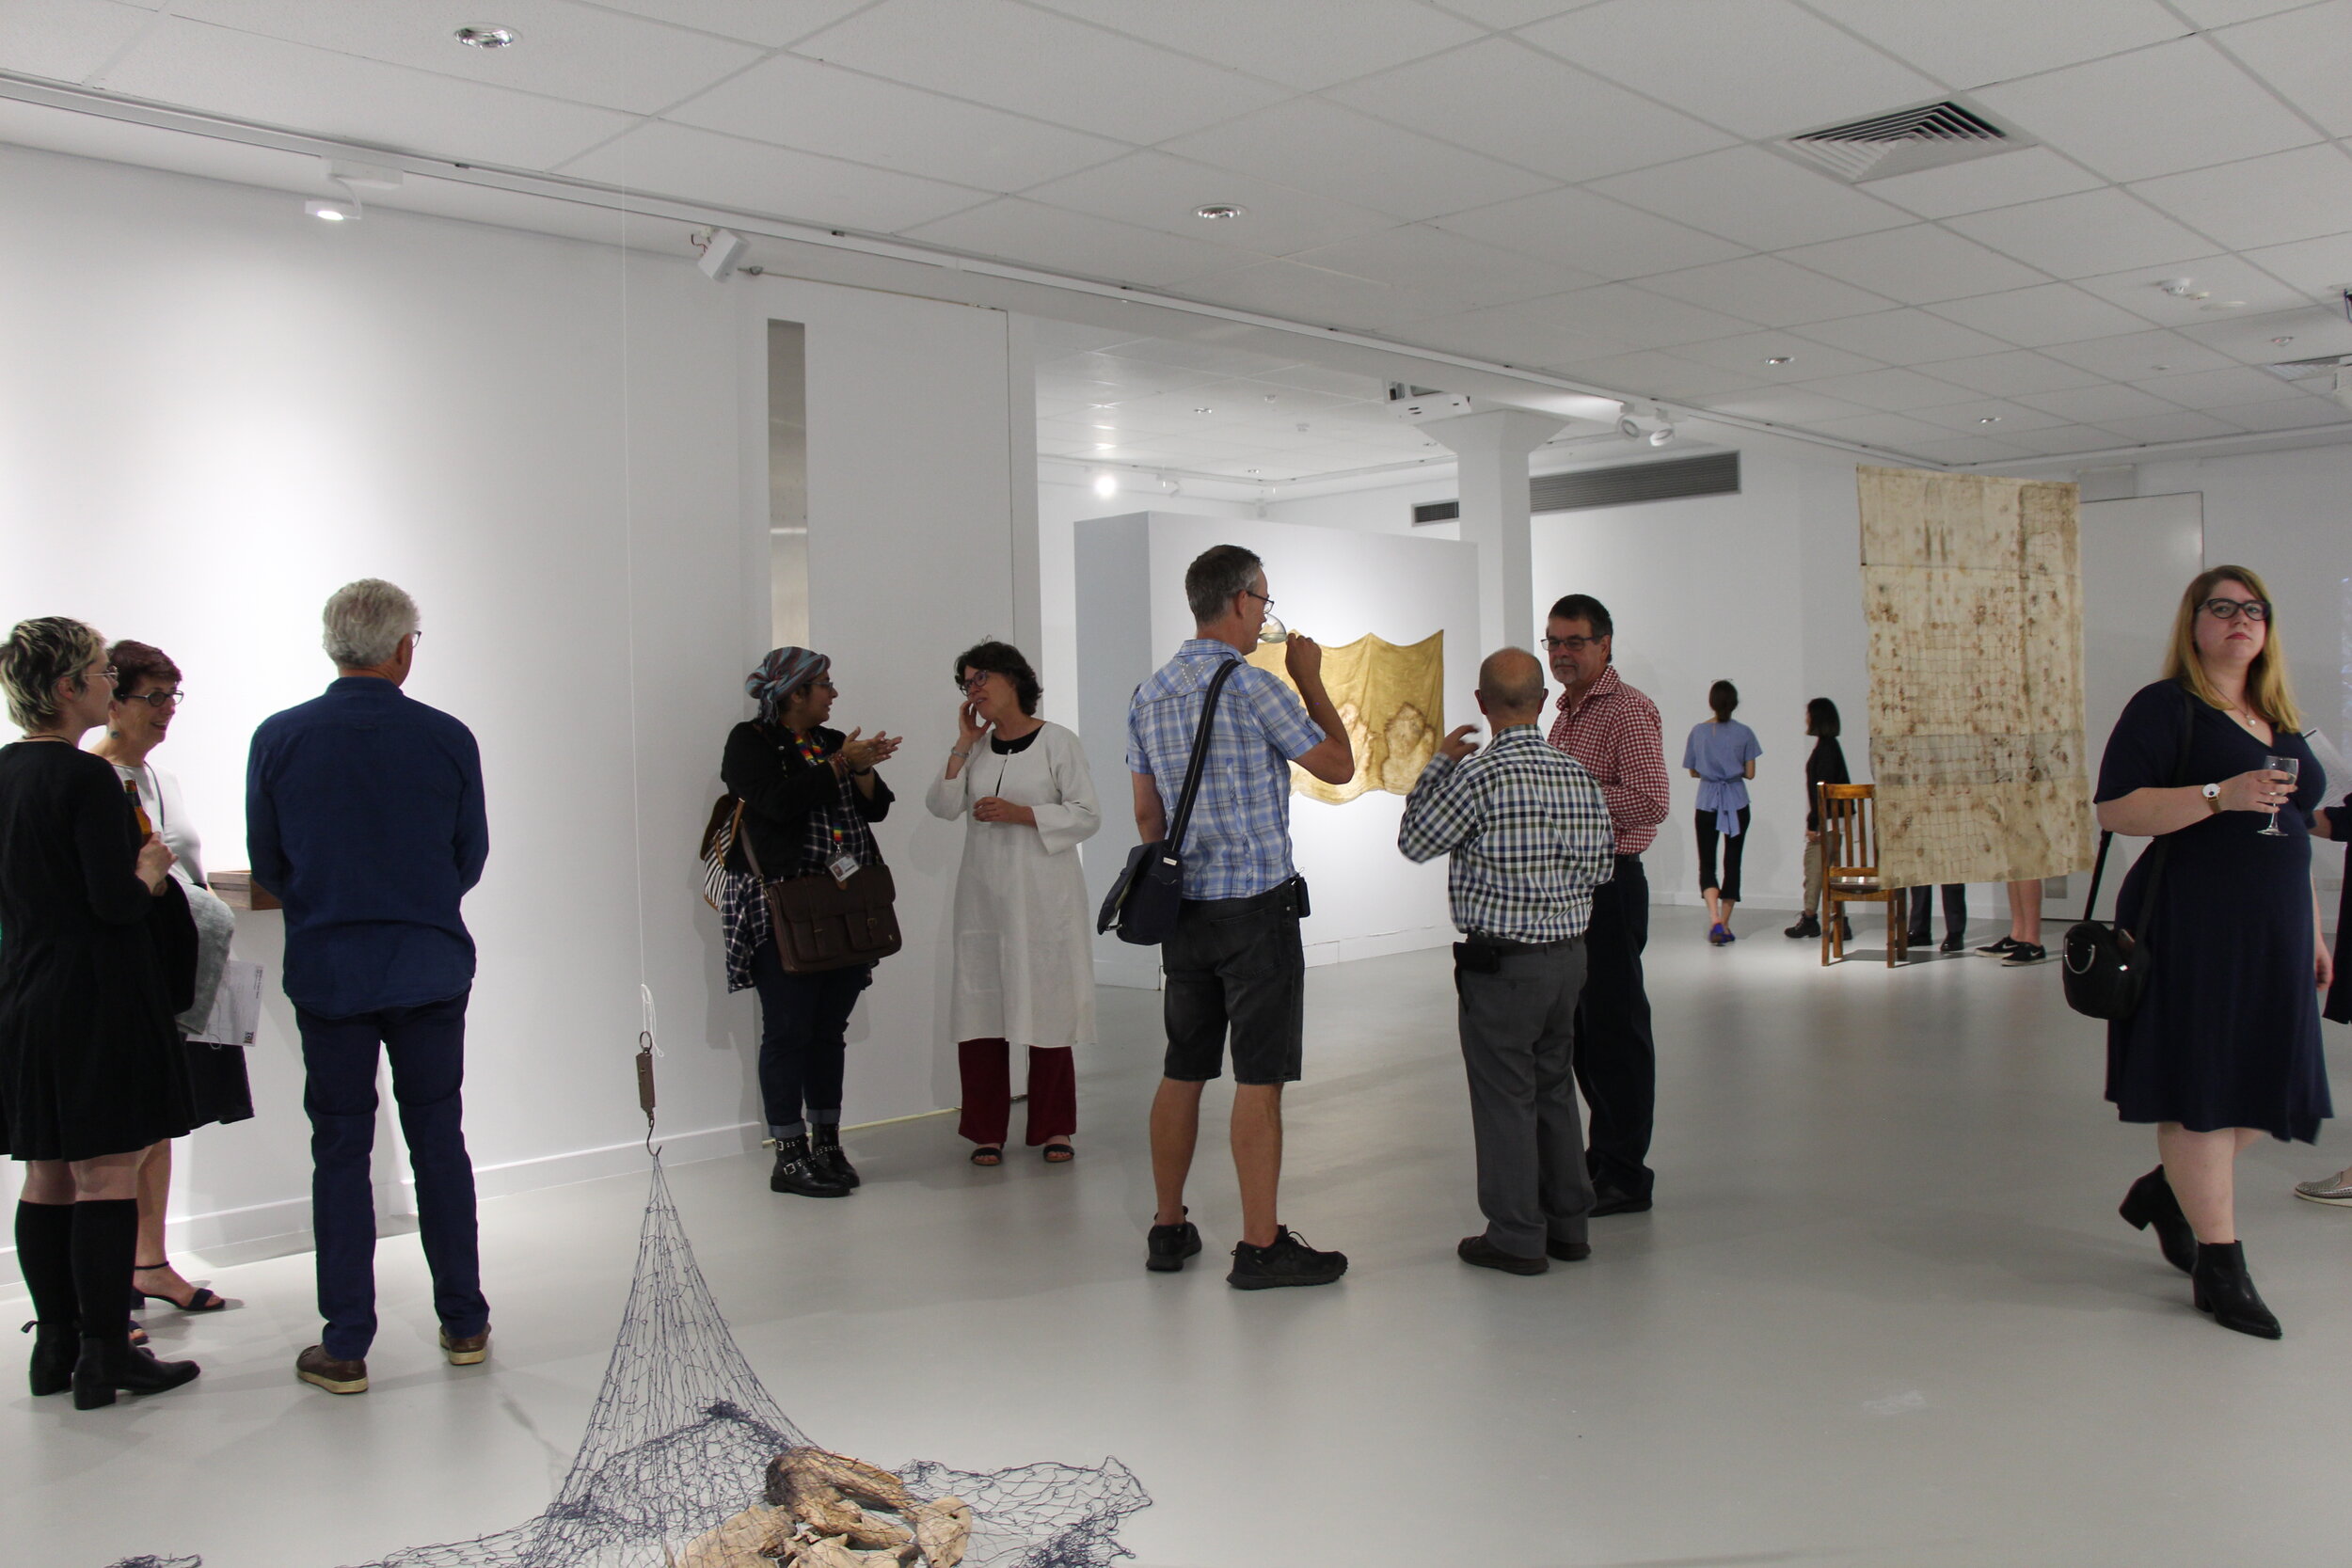 Fragmented Memories opening at Spectrum Project Space, ECU